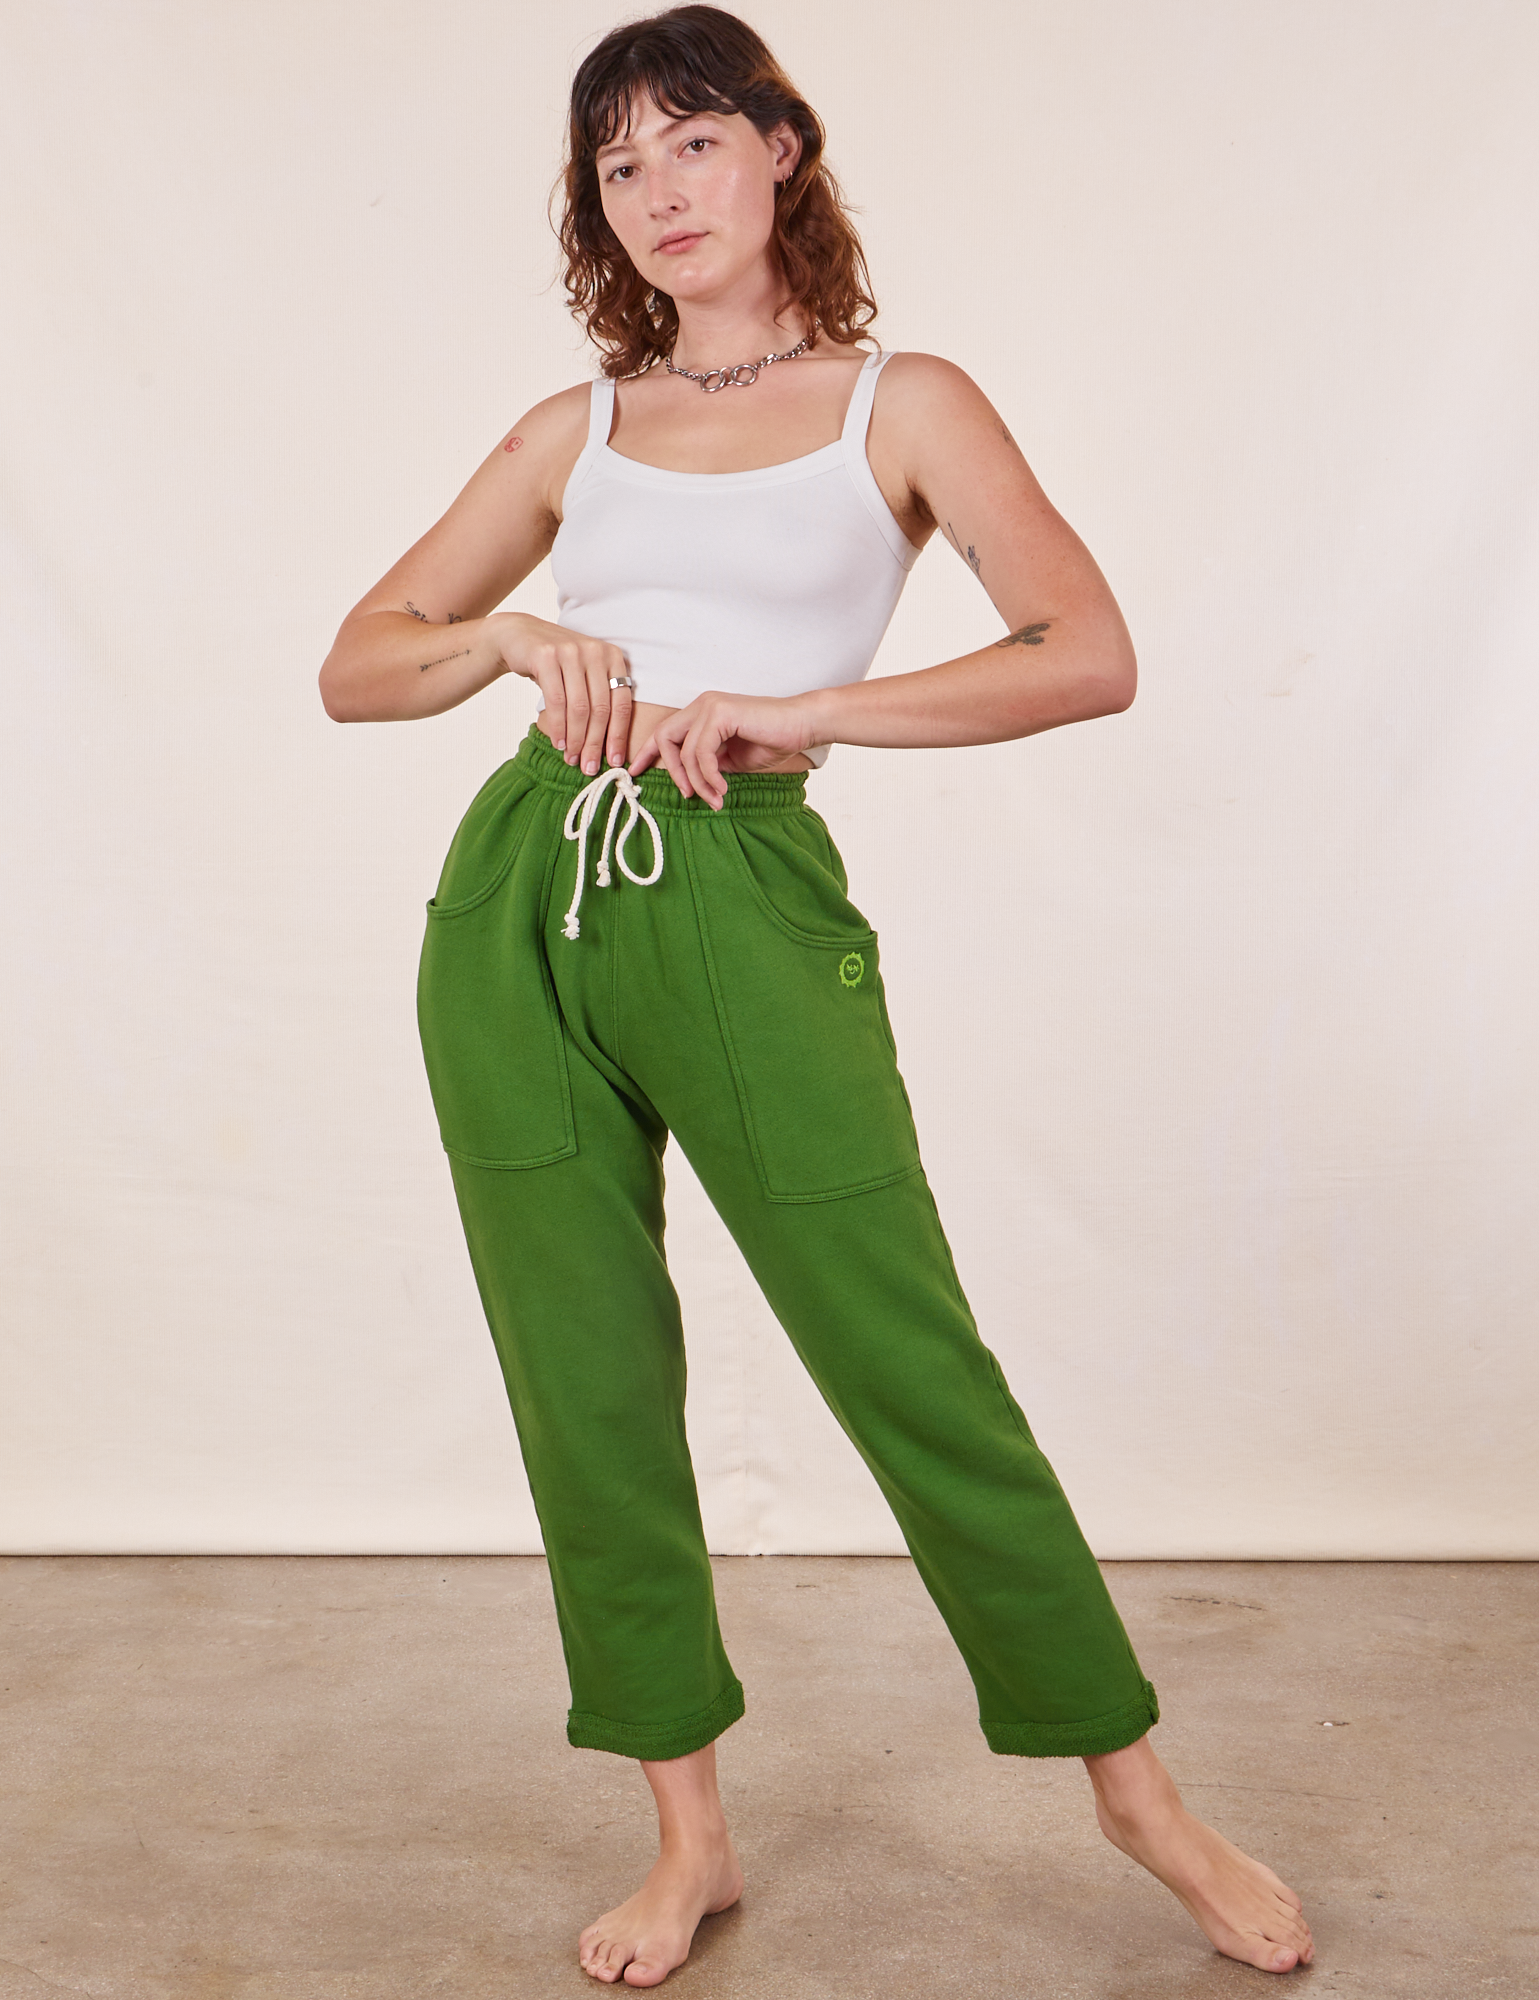 Alex is 5'8" and wearing XXS Cropped Rolled Cuff Sweatpants in Lawn Green paired with vintage off-white Cami